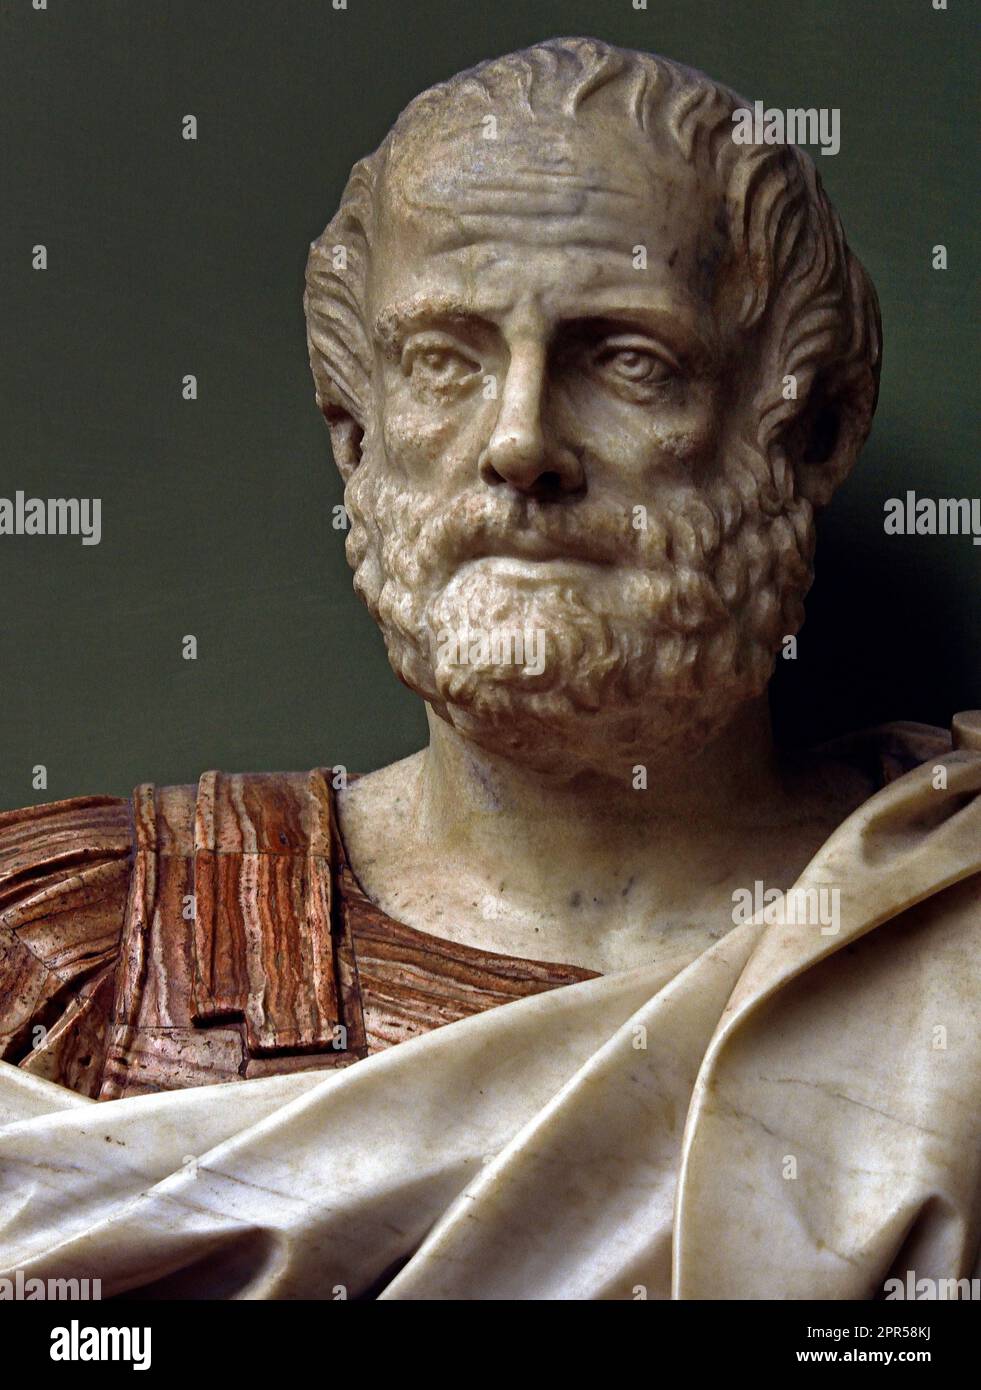 Aristotle 384–322 BC) Greek philosopher and scientist born in the city of Stagira, Chalkidiki, in the north of Classical Greece. Along with Plato, Aristotle is considered the 'Father of Western Philosophy, Galleria degli Uffizi, 1581, Founder: Francesco I de' Medici, Grand Duke of Tuscany,  Florence,  Italy, Italy, 2nd Century AD Stock Photo